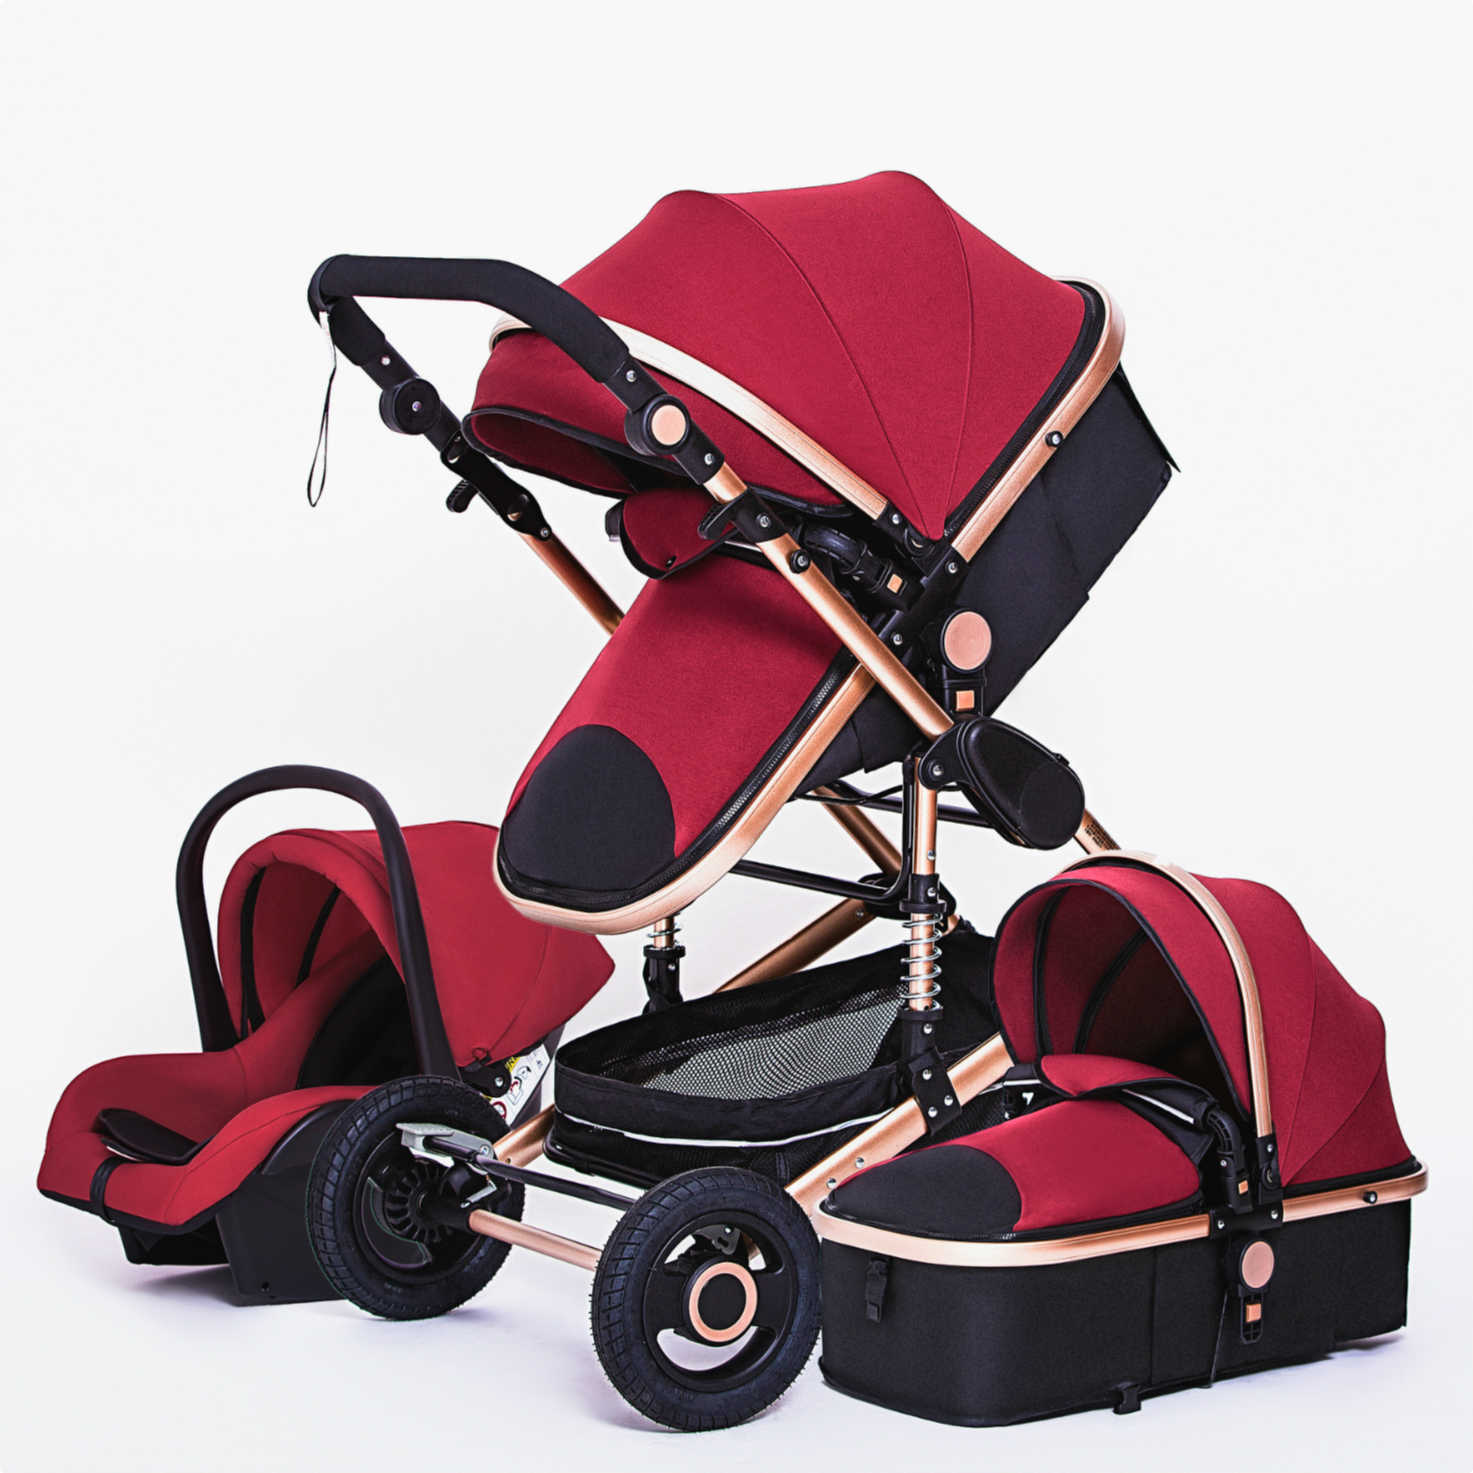 Strollers# Luxurious Baby Stroller Portable Travel Baby Carriage Folding Prams Aluminum Frame High Landscape Car for Newborn Baby